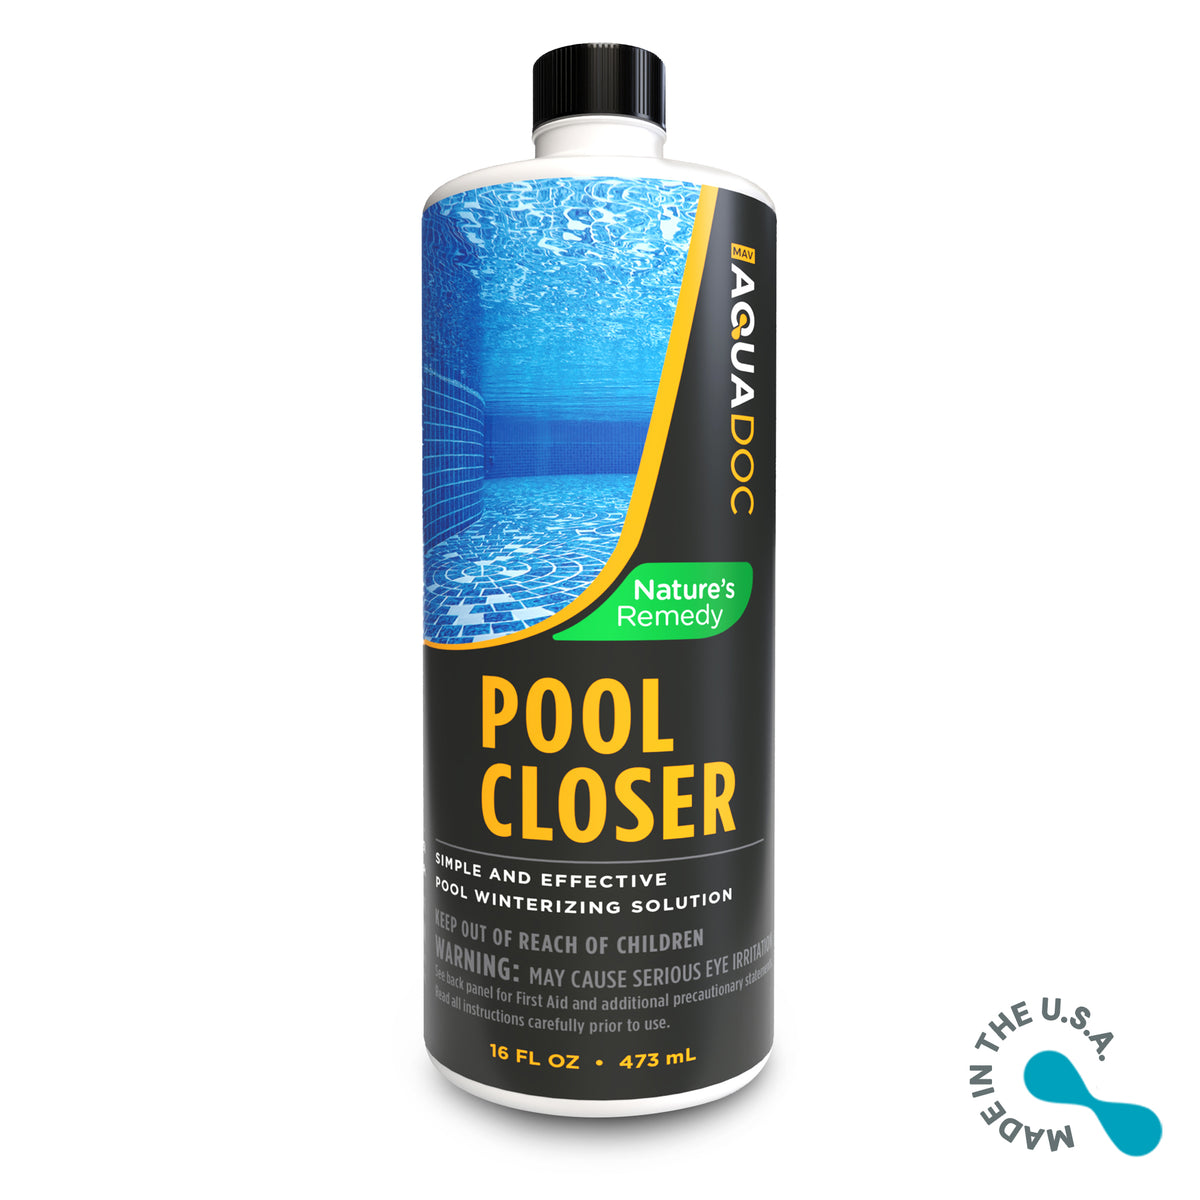 Simplify Your Pool Maintenance with AquaDoc's Pool Closer